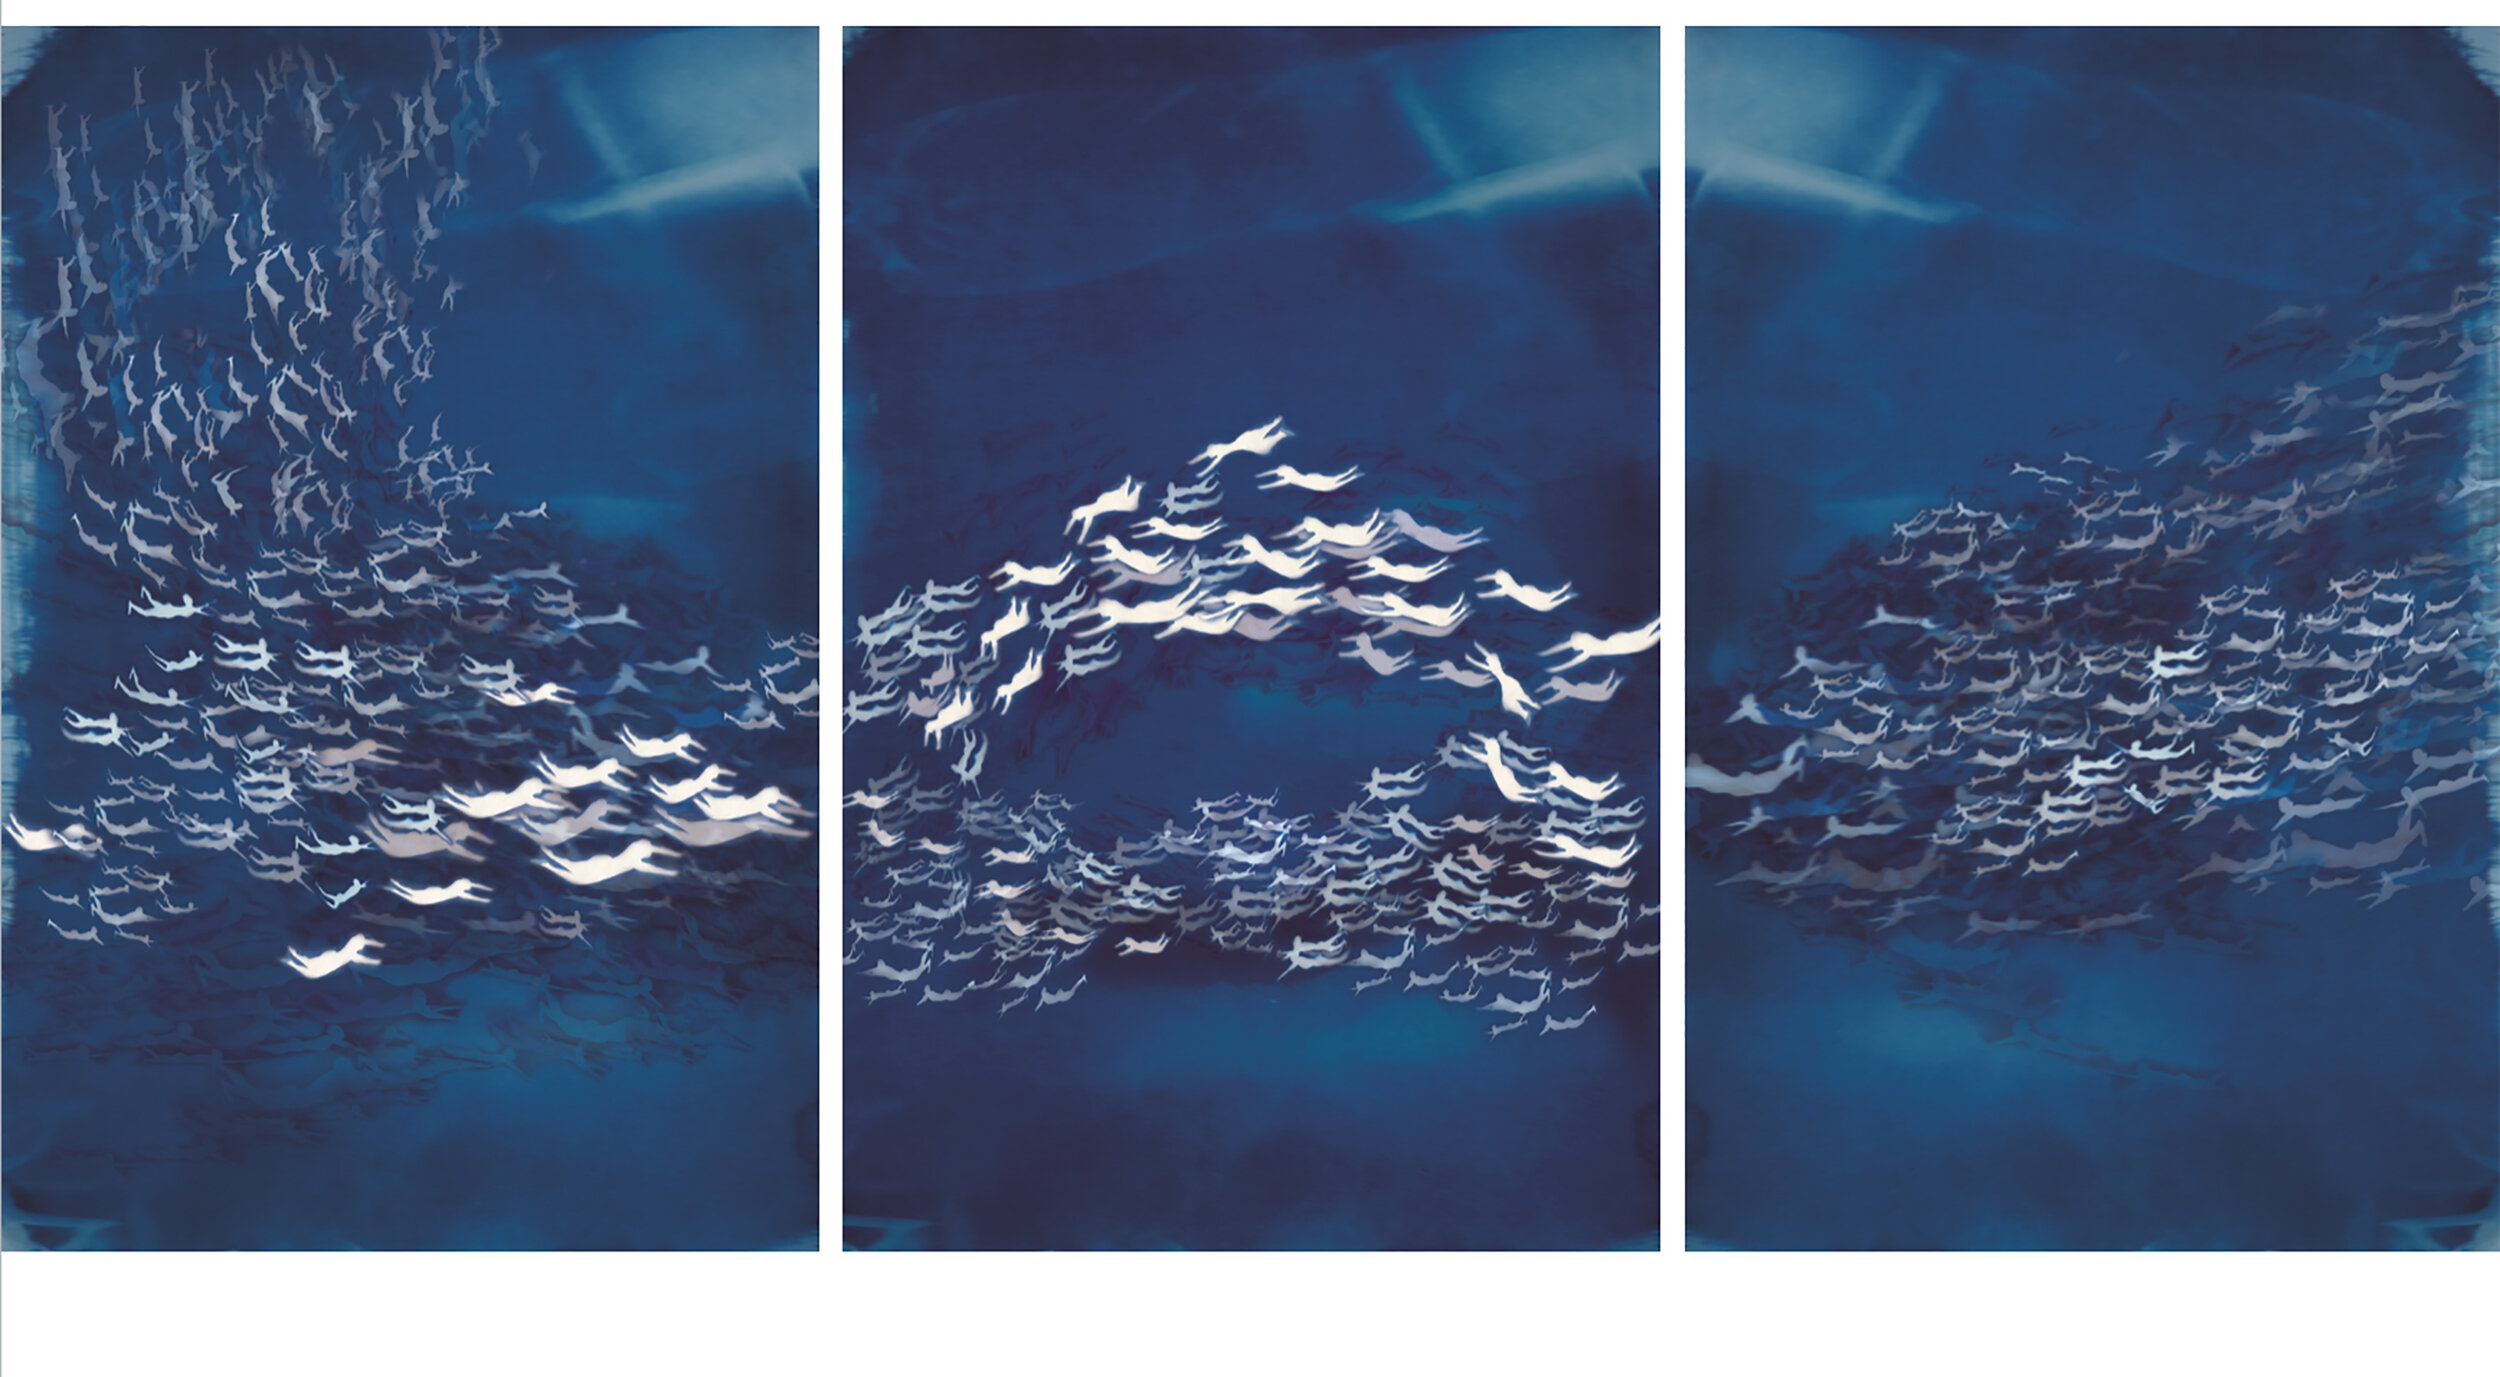  Han Qin,  The Age of Migration (Triptych) , 2018. Cyanotype, watercolor, inkjet print on silk, 90 x 60 inches&nbsp; ©Han Qin, courtesy Fou Gallery 